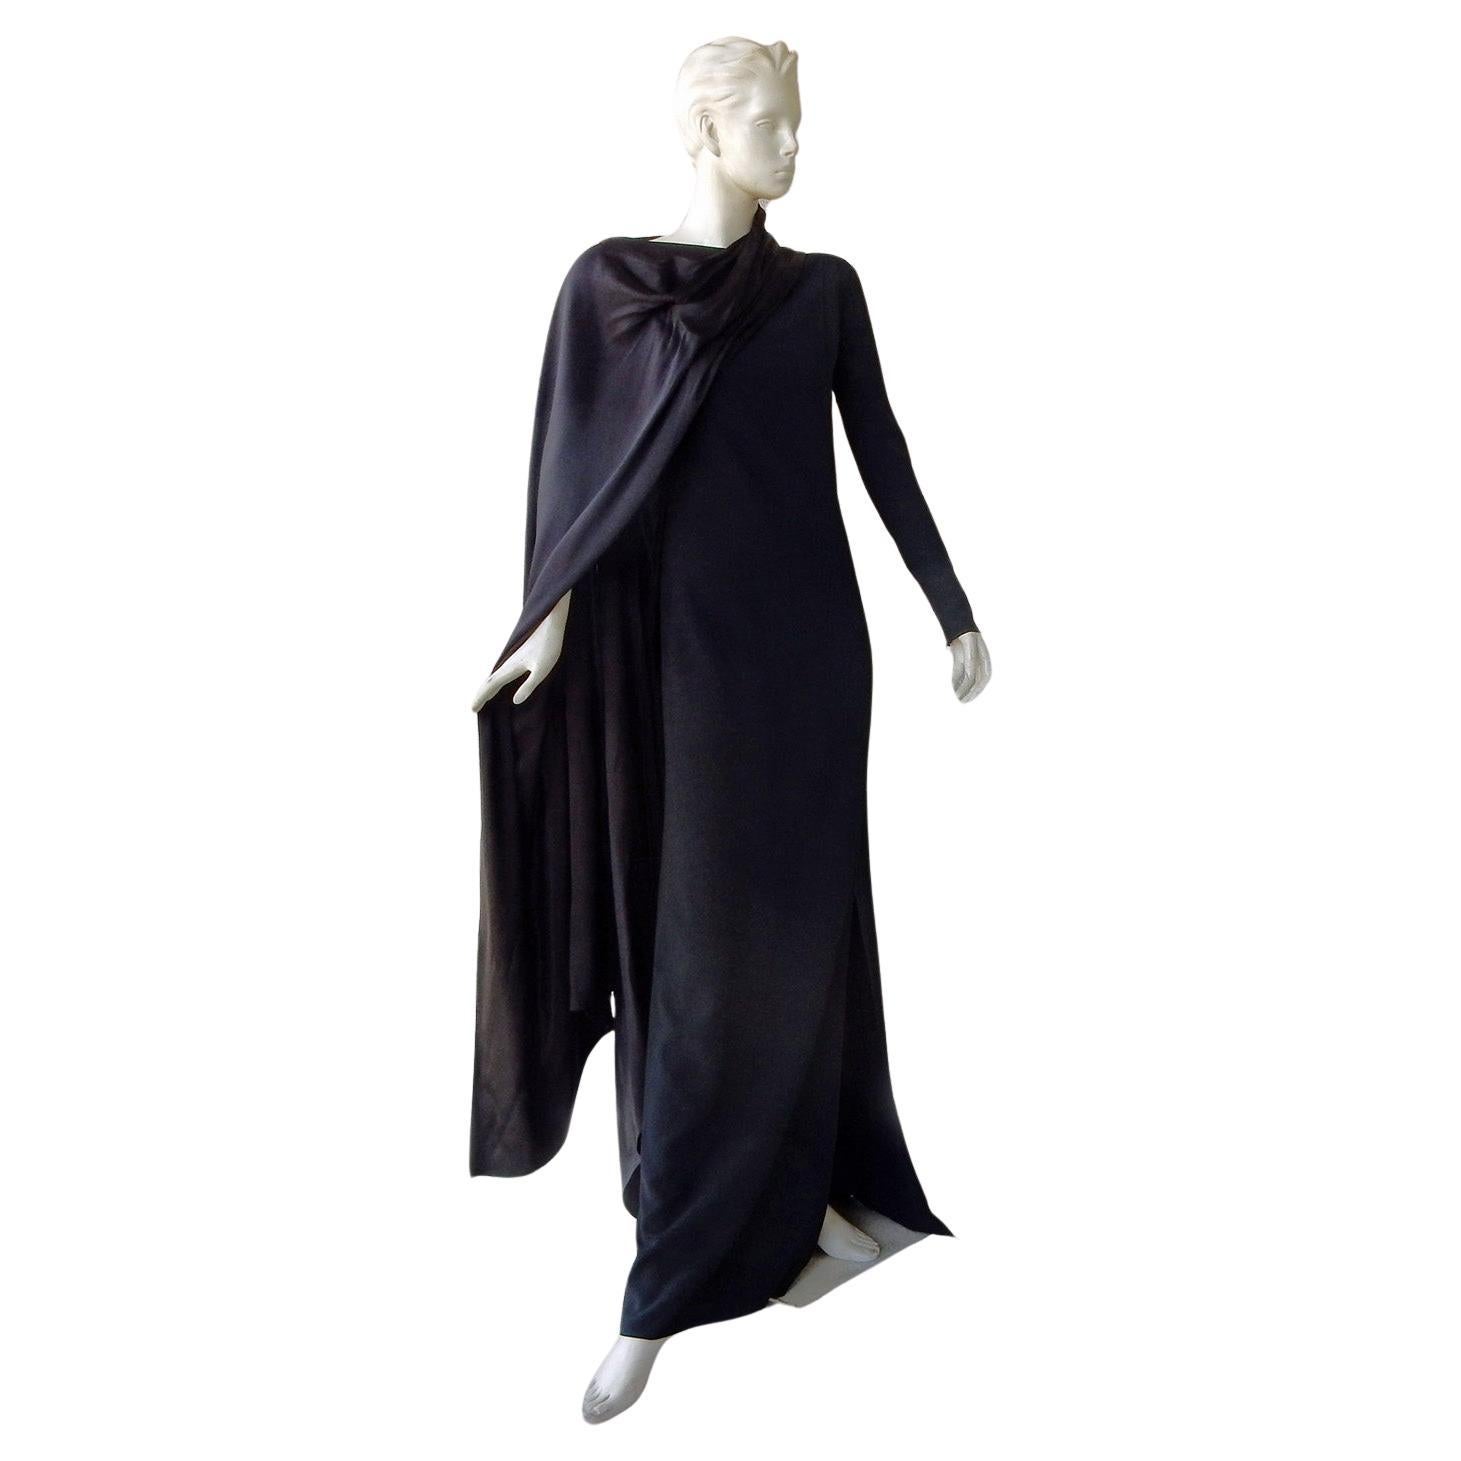 Schiaparelli rare limited edition bias cut gown from the 2021 collection by Daniel Roseberry. Black silk long sleeve cowl neck with cape overlay. Single sleeve with zipper wrist. Side zipper closure.  Makes a dramatic distinctive stylish entrance